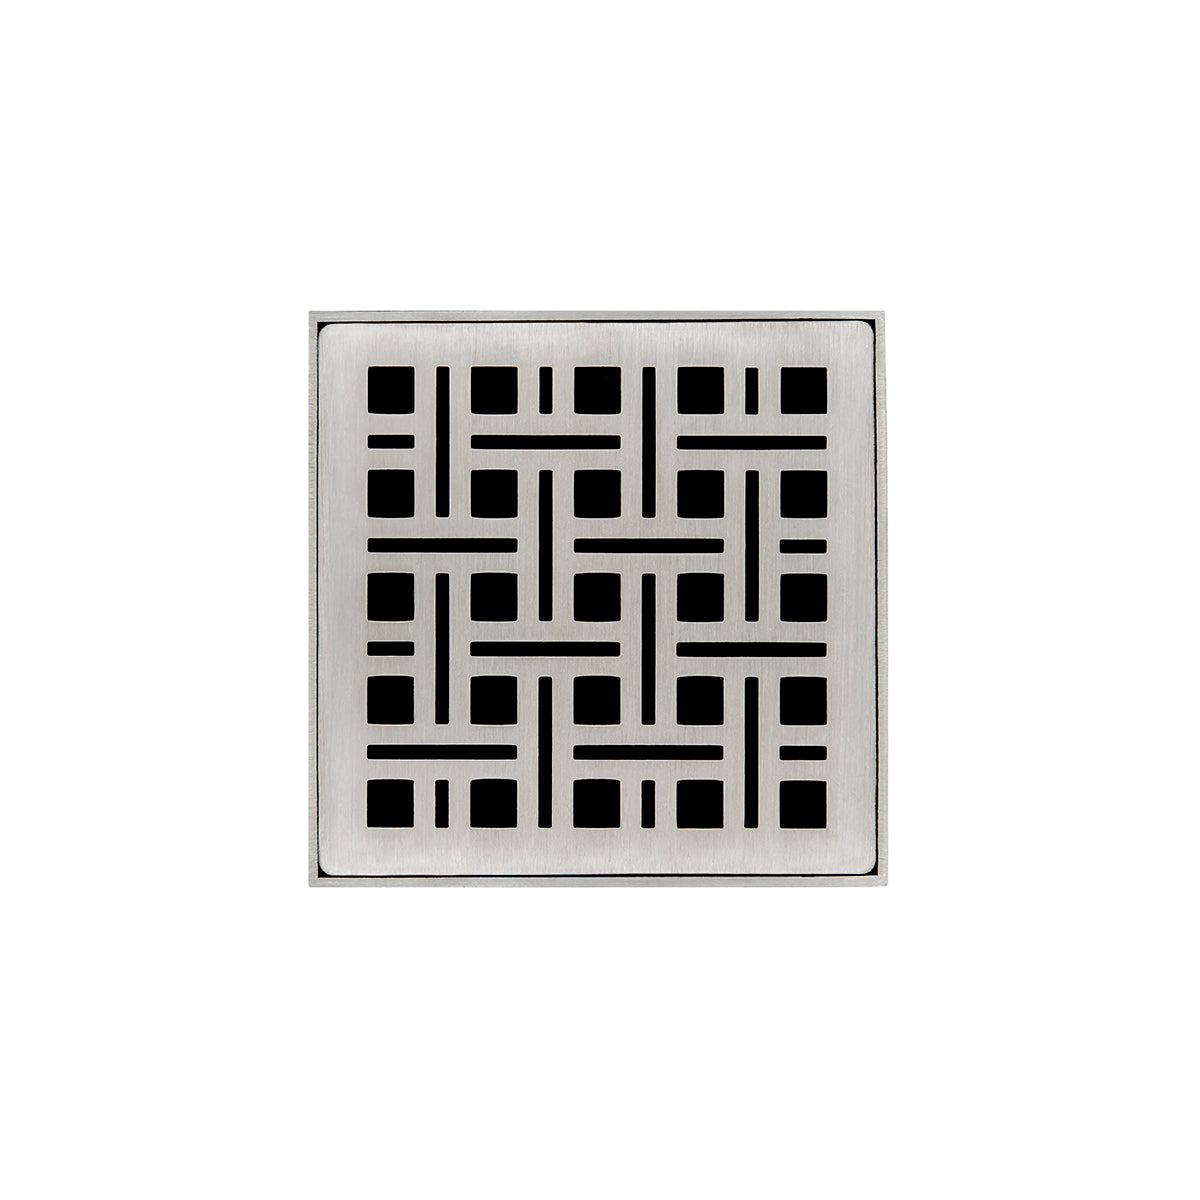 Infinity Drain 4" x 4" VDB 4 Premium Center Drain Kit with Weave Pattern Decorative Plate with PVC Bonded Flange Drain Body, 2", 3" and 4" Outlet